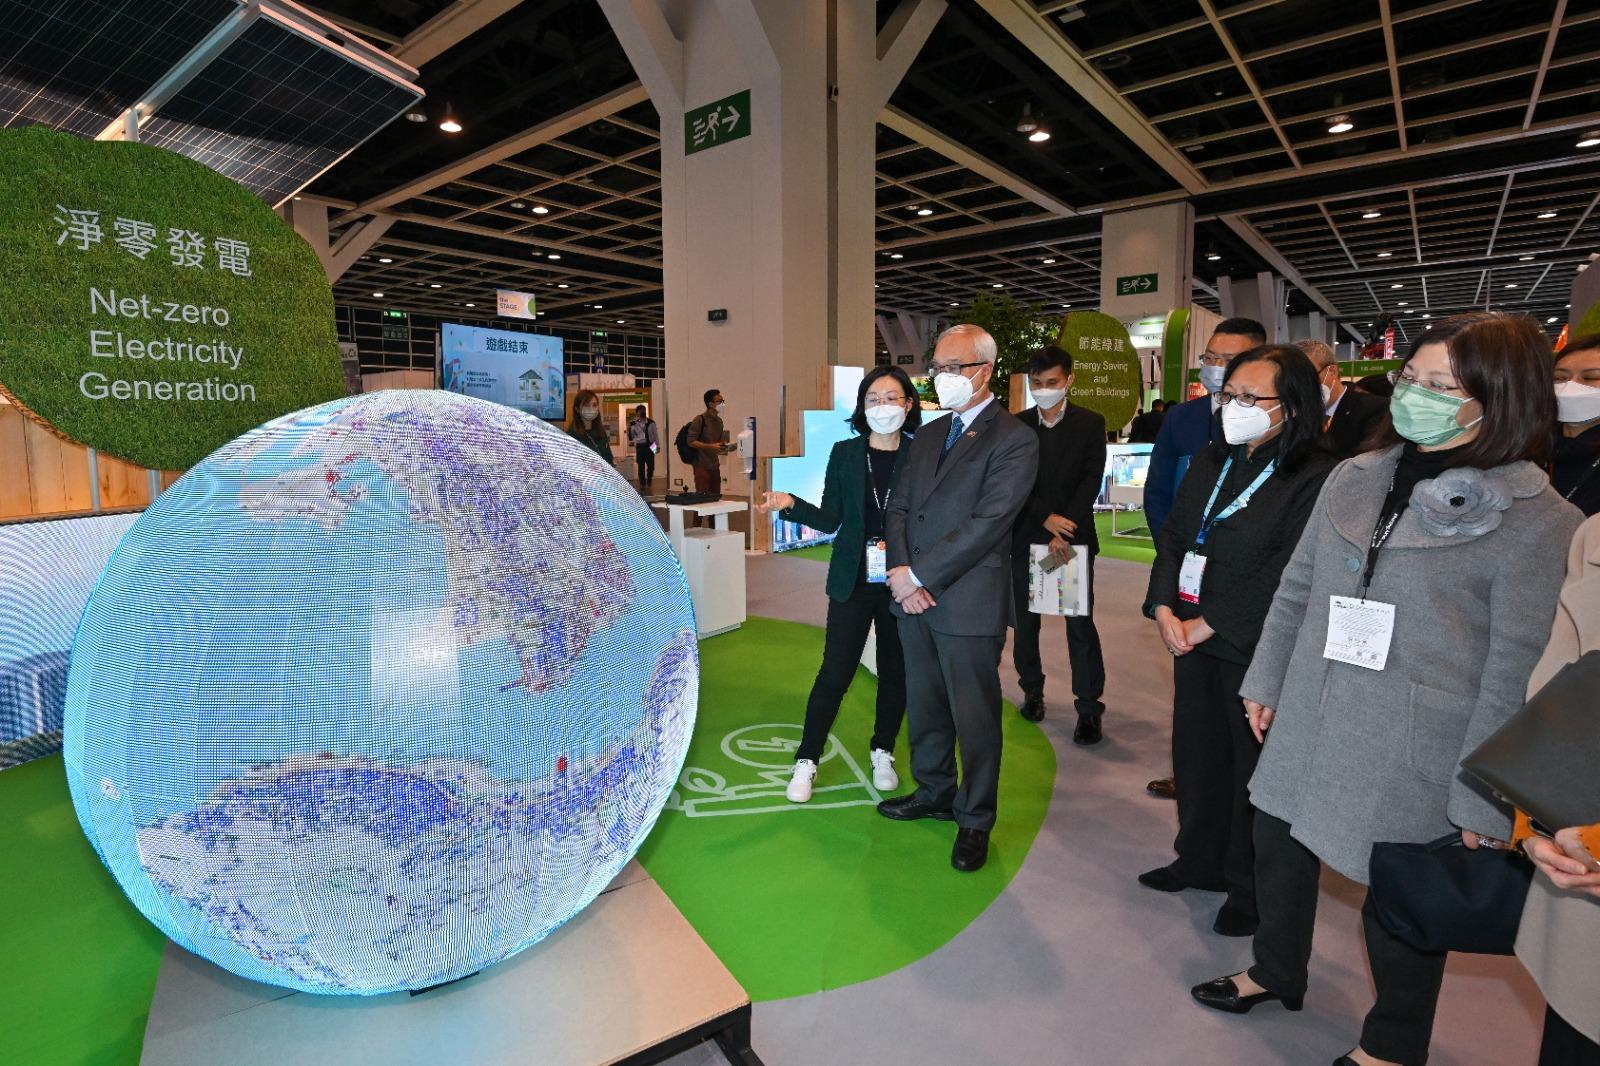 The Secretary for Environment and Ecology, Mr Tse Chin-wan (second left), visits the 17th Eco Expo Asia today (December 14) and is briefed on the strategies and renewable energy initiatives carried out by the Government to achieve net-zero electricity generation in the "Net-zero Electricity Generation" zone.